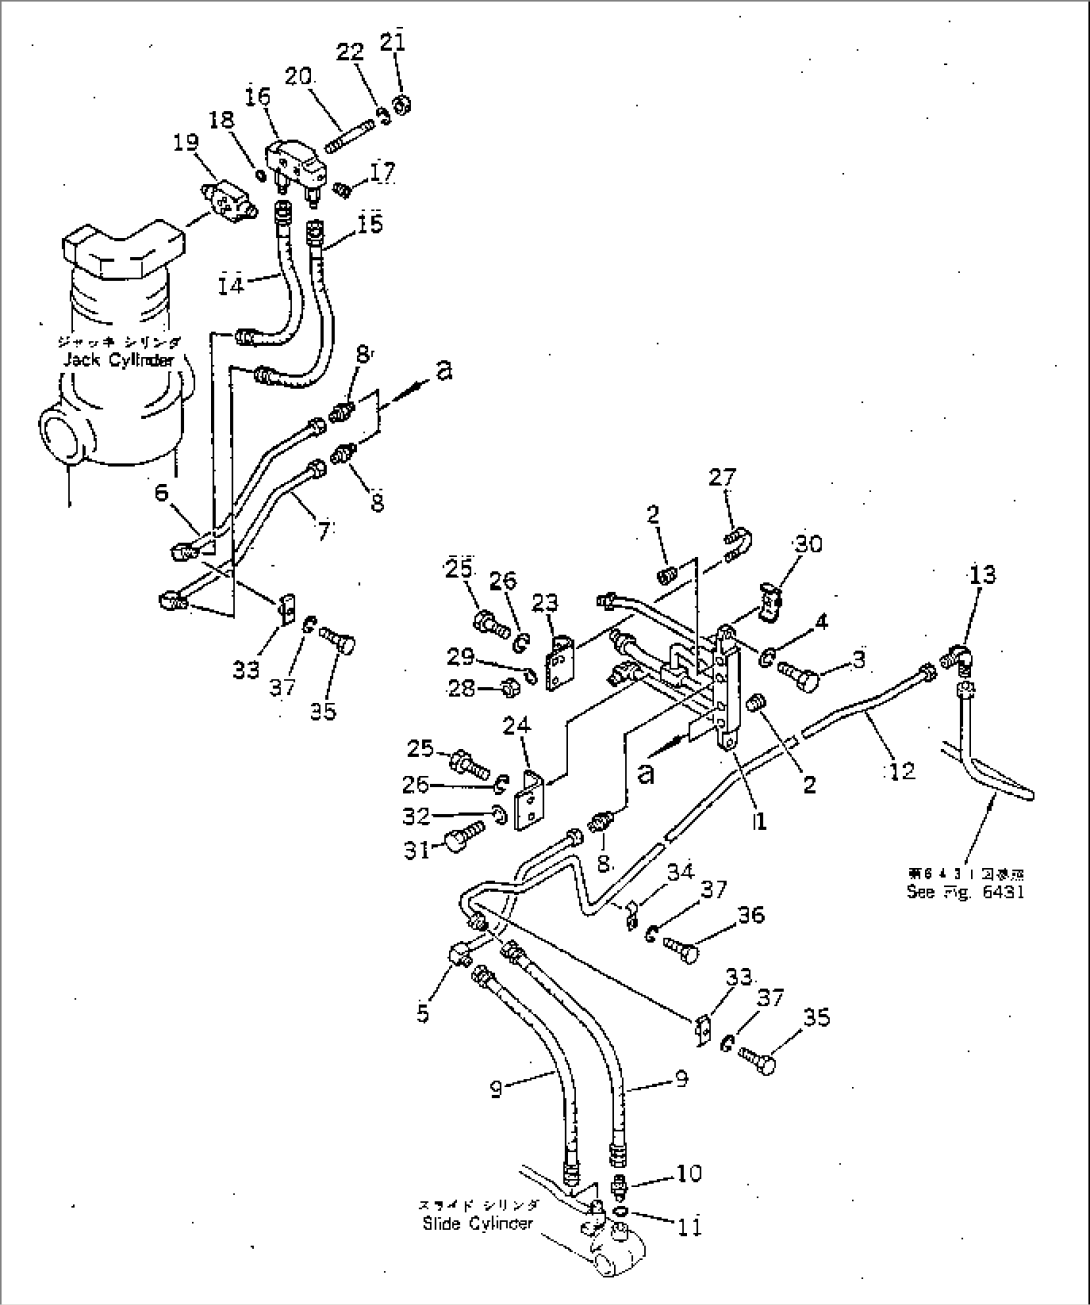 HYDRAULIC PIPING (FRONT L.H. OUTRIGGER CYLINDER LINE)